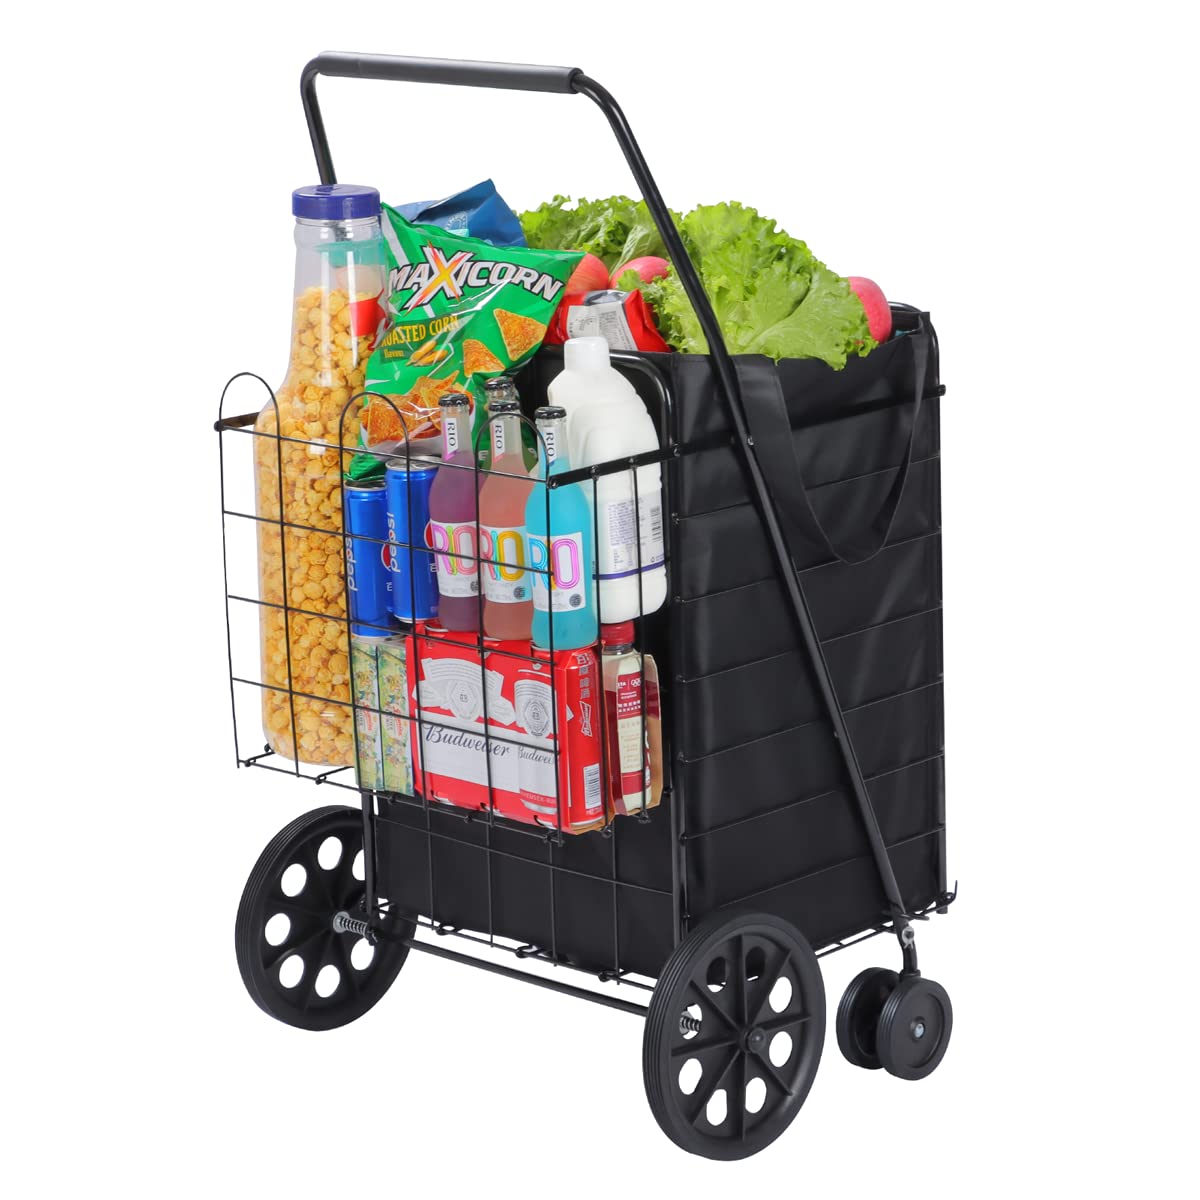 Upgraded Shopping Cart w/ 360° Swivel Wheels & Waterproof Basket Liner for Groceries, Shopping Laundry - Foldable Collapsible & Lightweight - Extra Large Heavy Duty Utility Cart